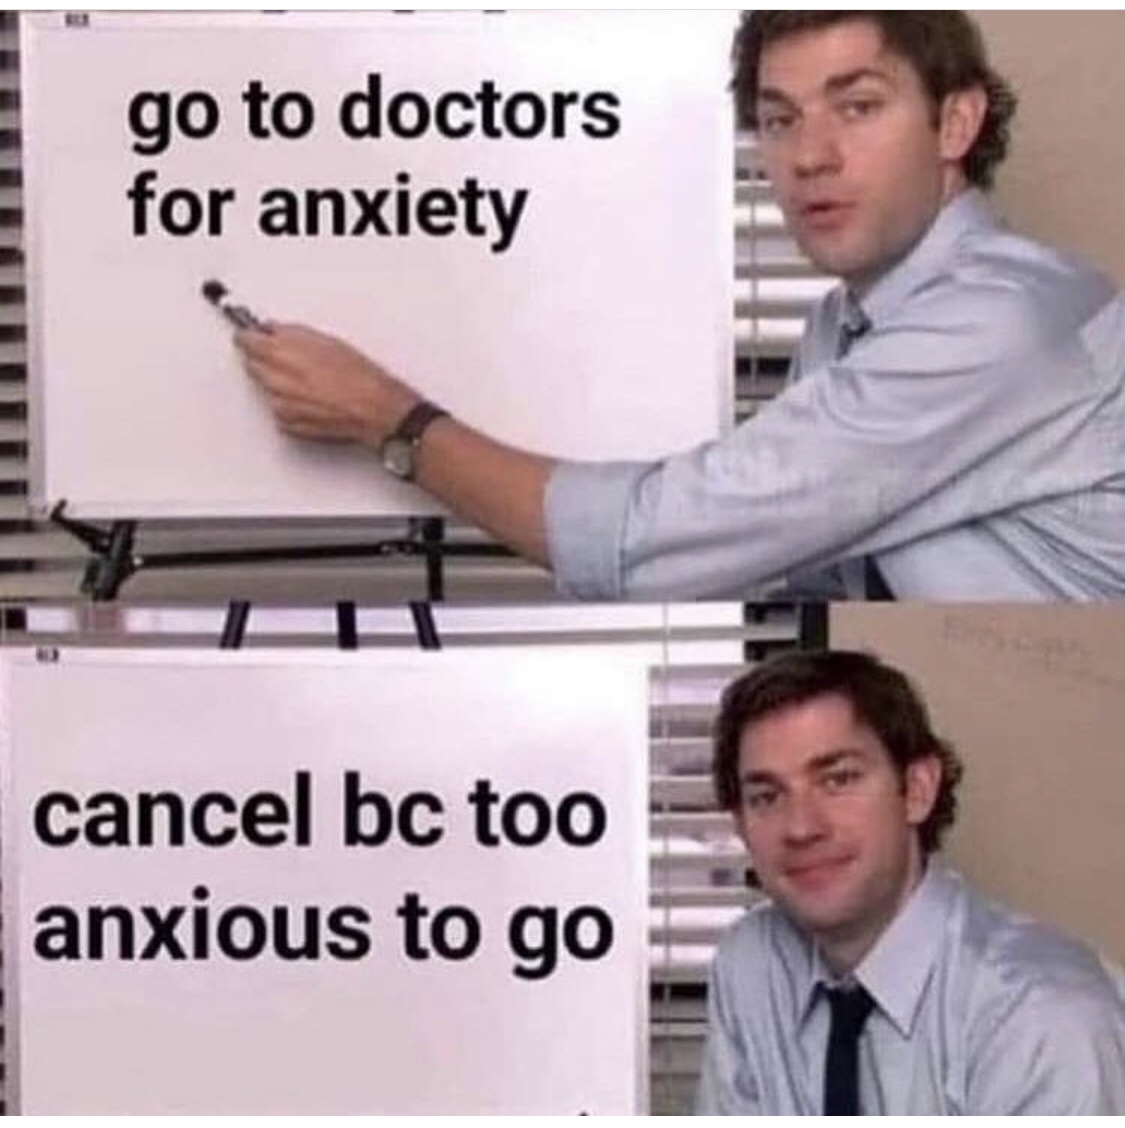 2020 barbara walters meme - go to doctors for anxiety cancel bc too anxious to go